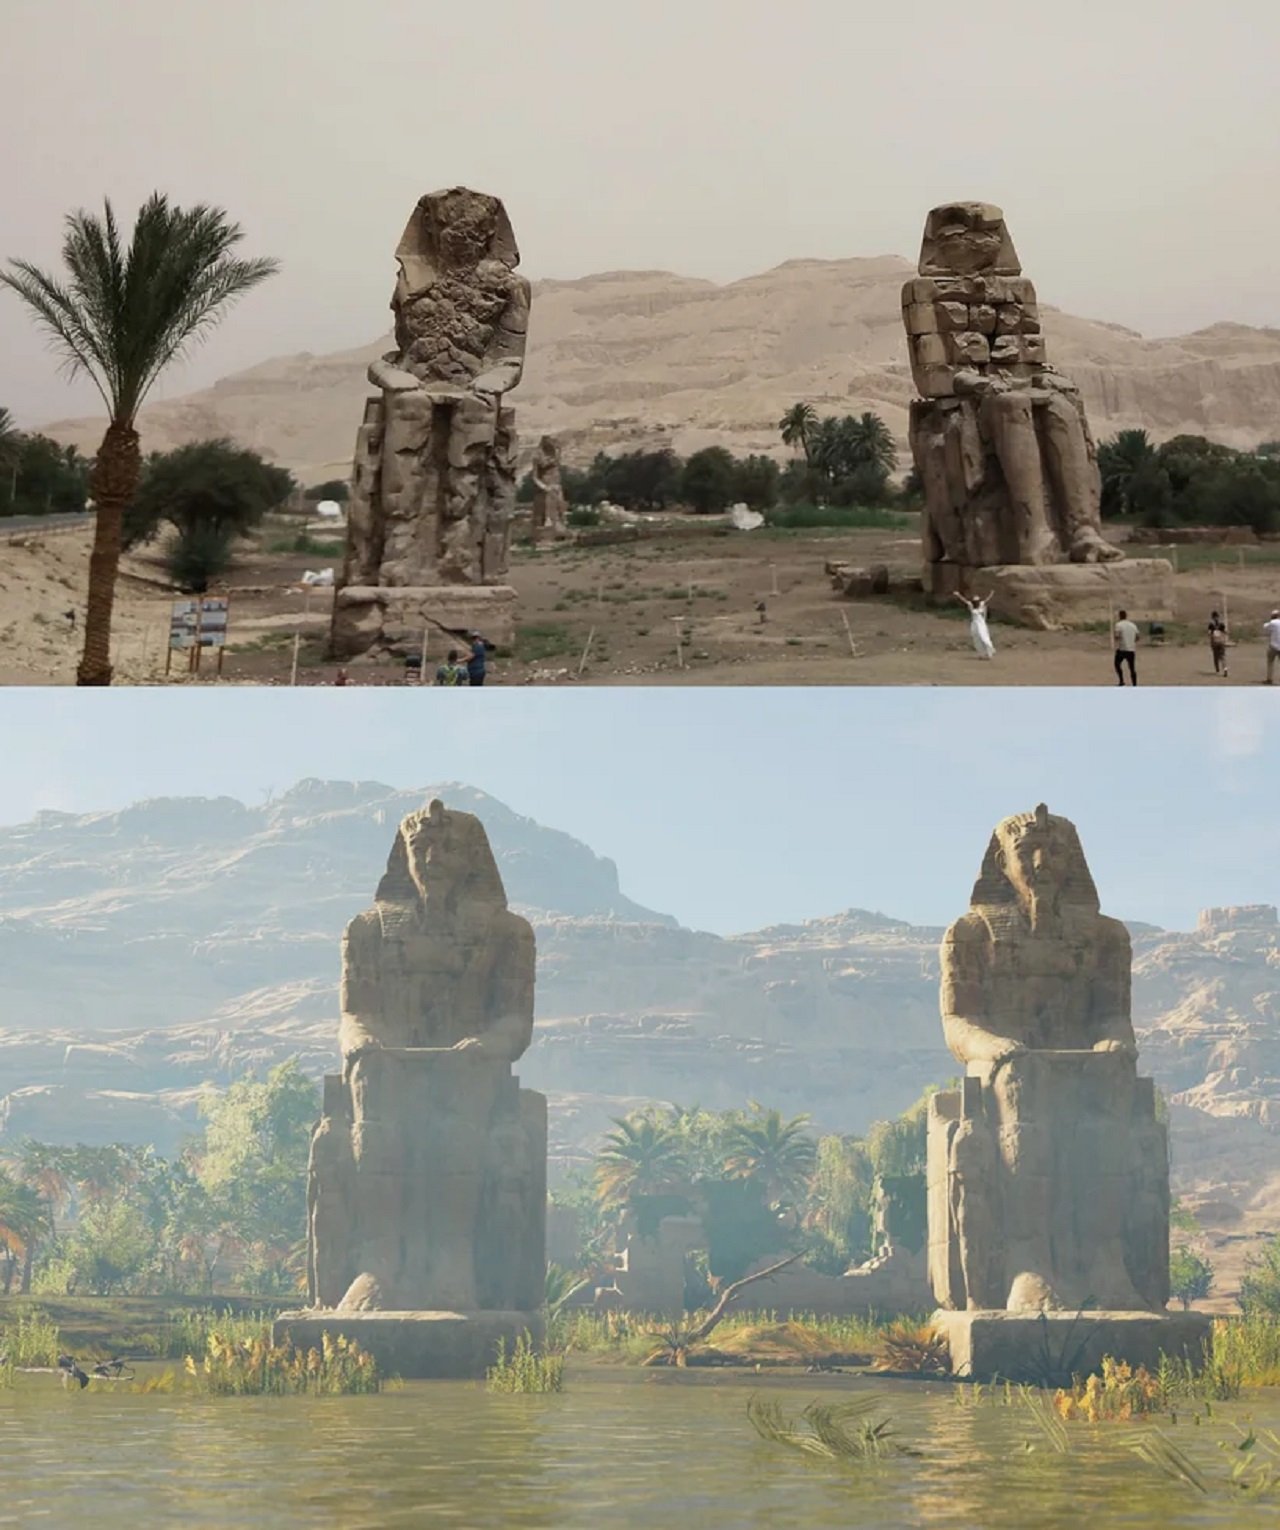 There is a dual shot of the Colossi of Memnon statues. One is in real life while the other is from the game.